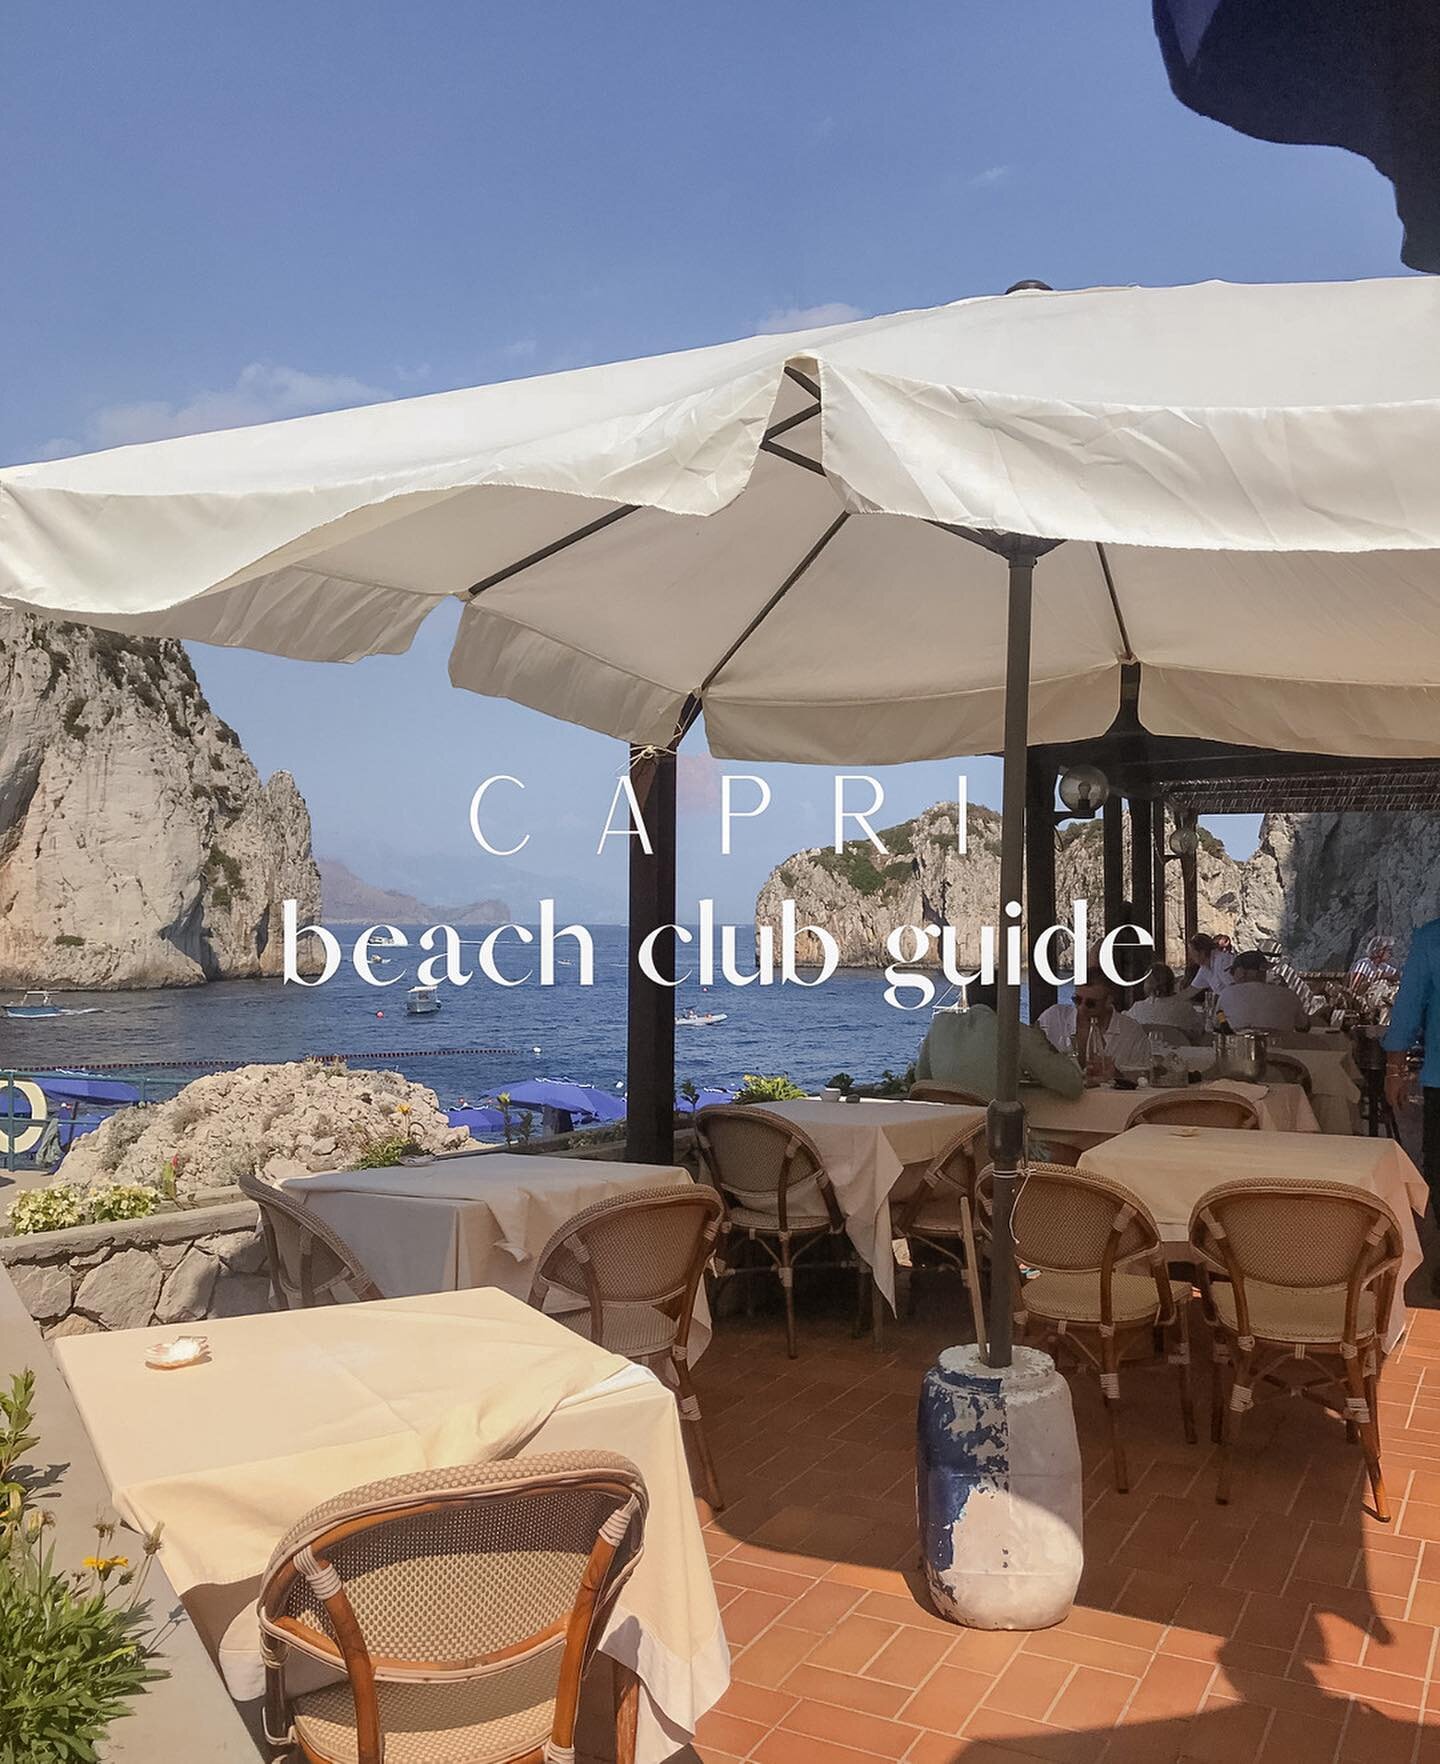 Want to spend a day in Capri without blowing your entire life savings? While all the tourists flock to La Fontelina in Capri, we found a gem that is not only a quarter of the price, but also has a great chef + beach chairs perched on the water.

Say 